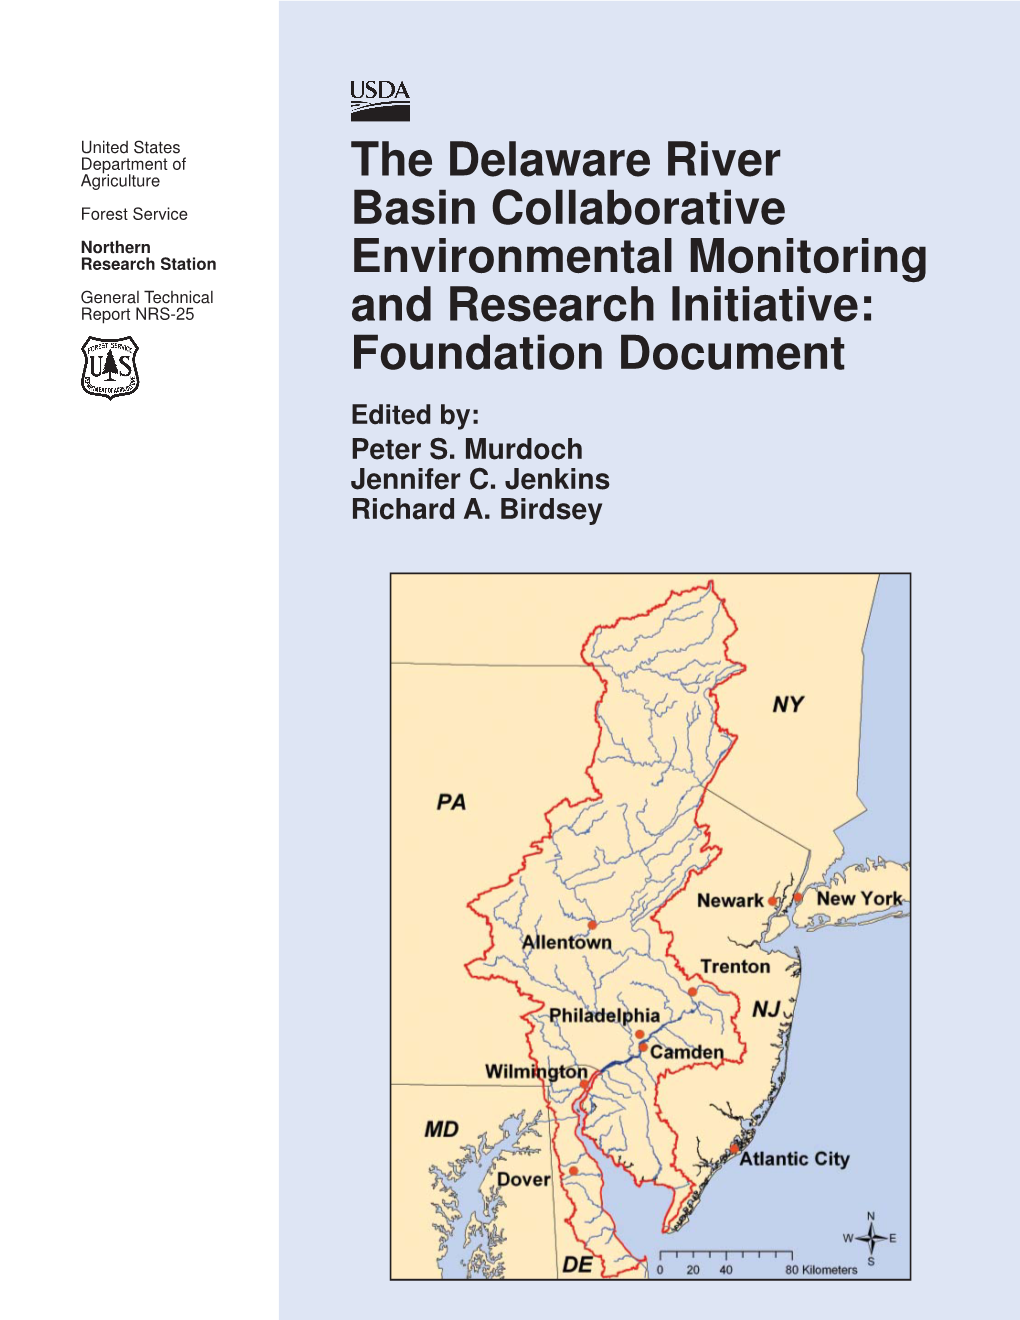 The Delaware River Basin Collaborative Environmental Monitoring and Research Initiative: Foundation Document